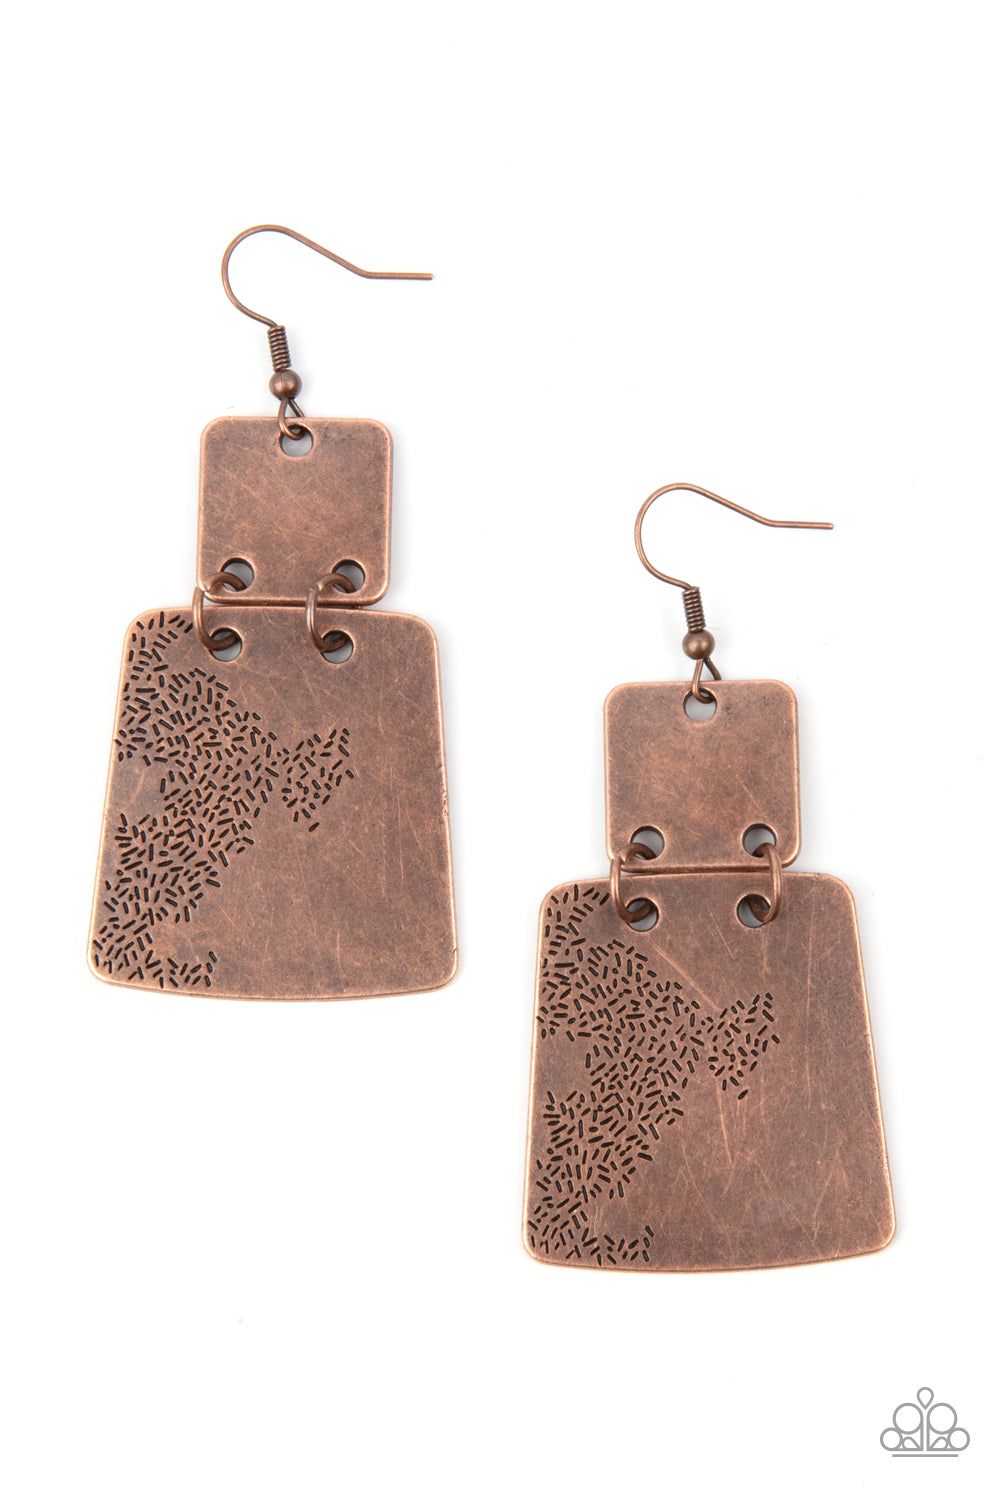 Paparazzi Tagging Along - Copper Earrings - A Finishing Touch Jewelry